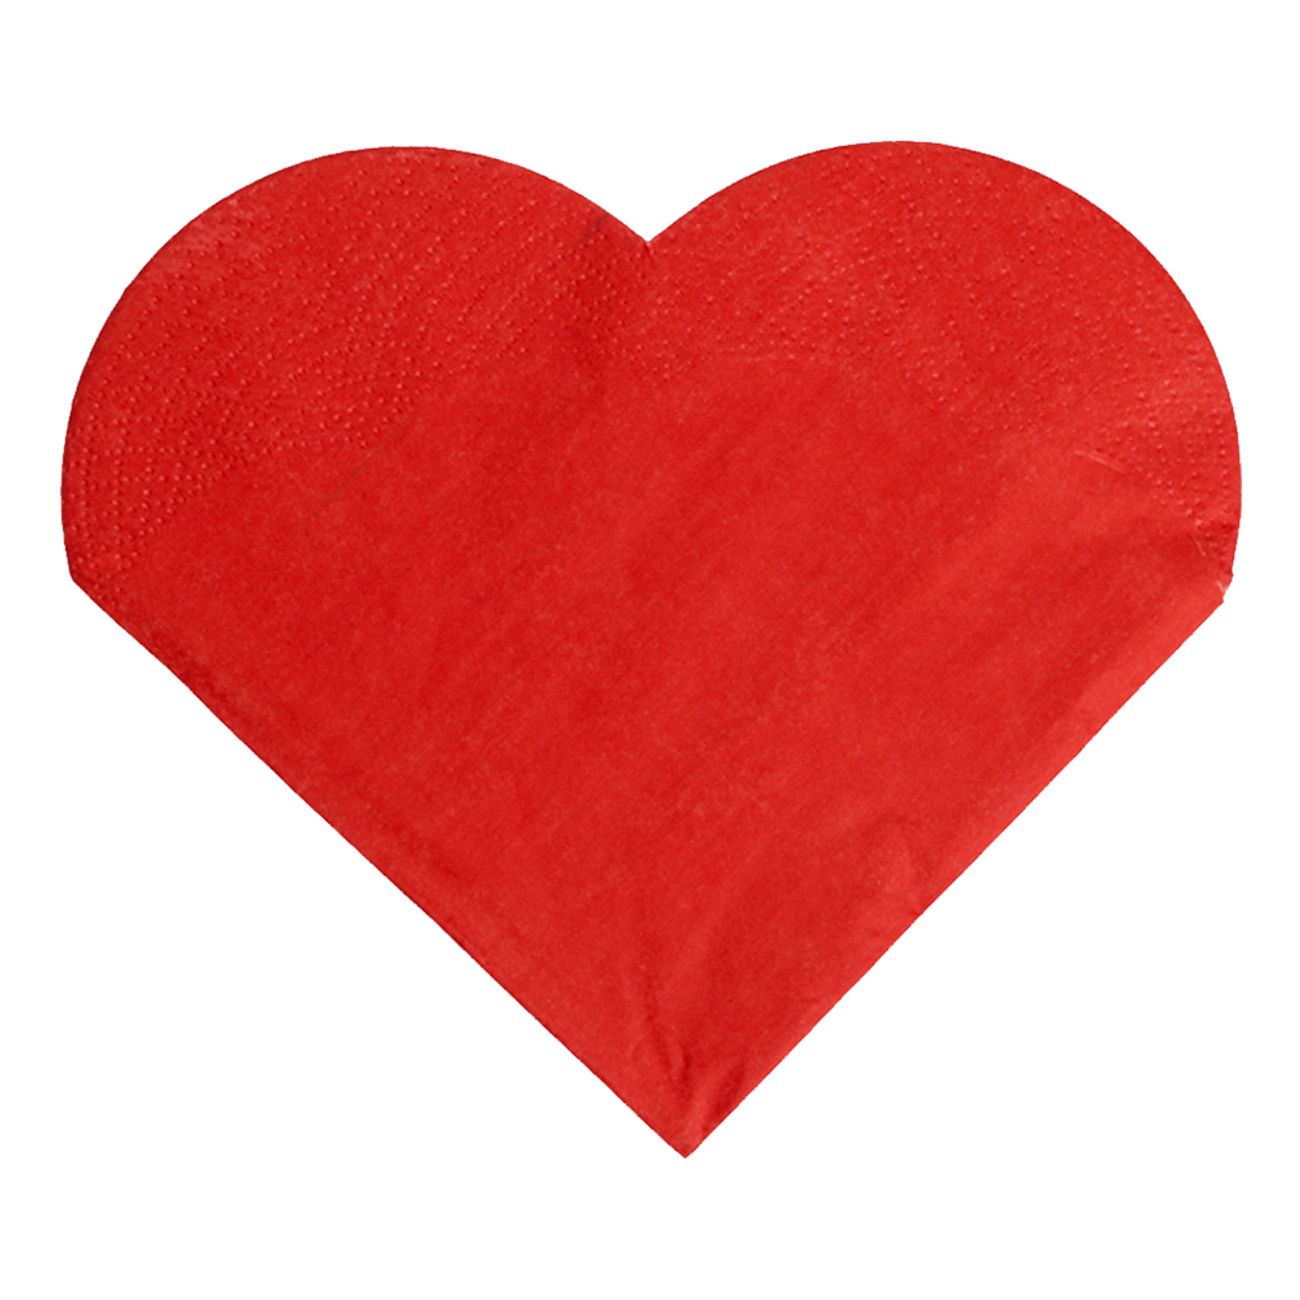 red-coloured-paper-napkins-in-heart-design-ca-33-x-33-cm-3-layers-12-pcs-per-polybag-80939-1